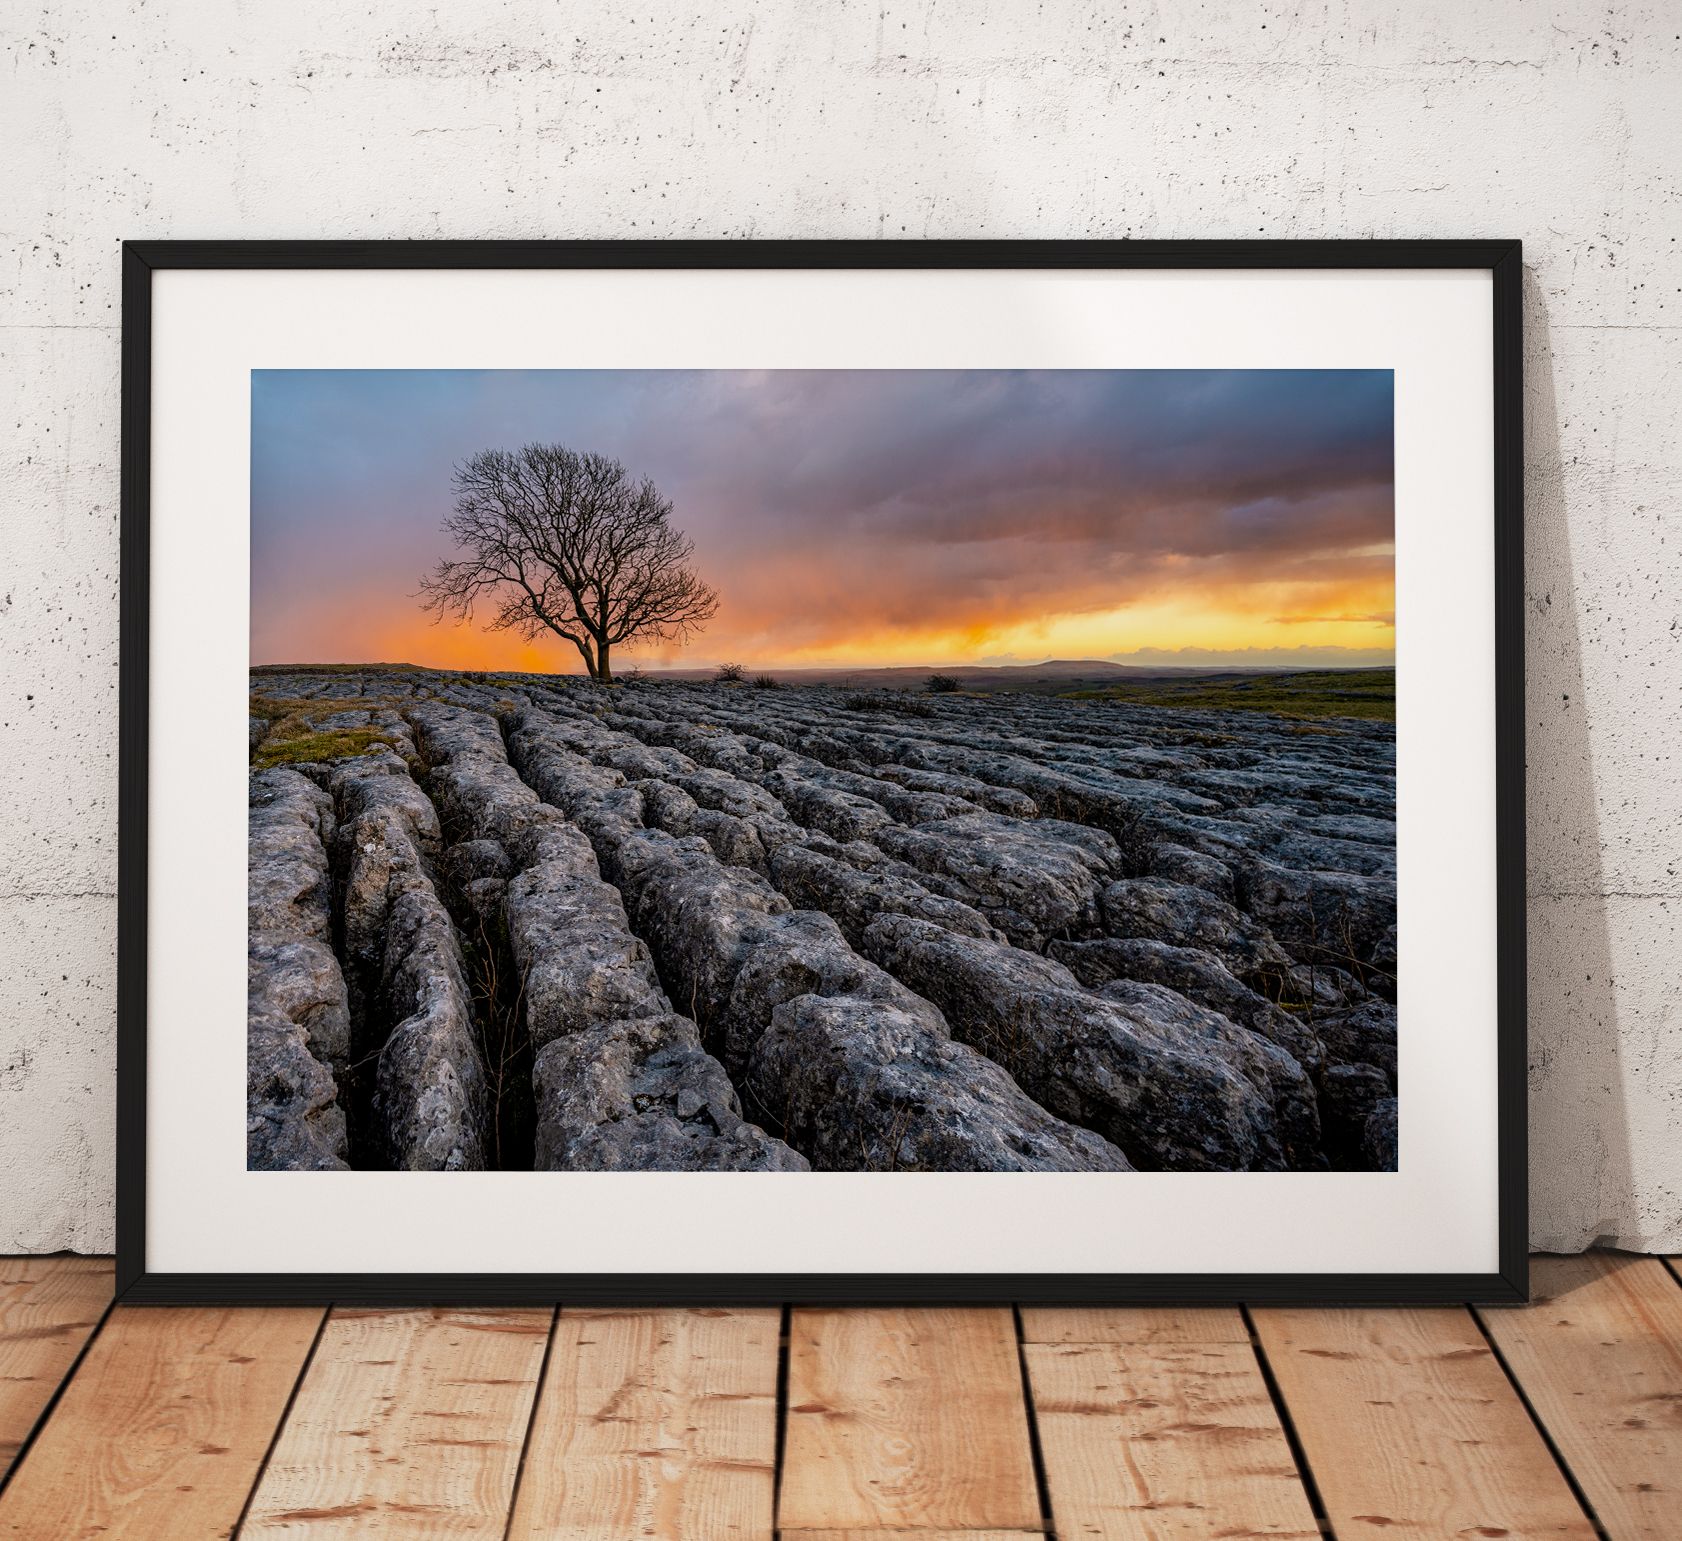 Beautiful photo of a Lone tree at Malham on the limestone pavement during sunset in the Yorkshire Dales. England